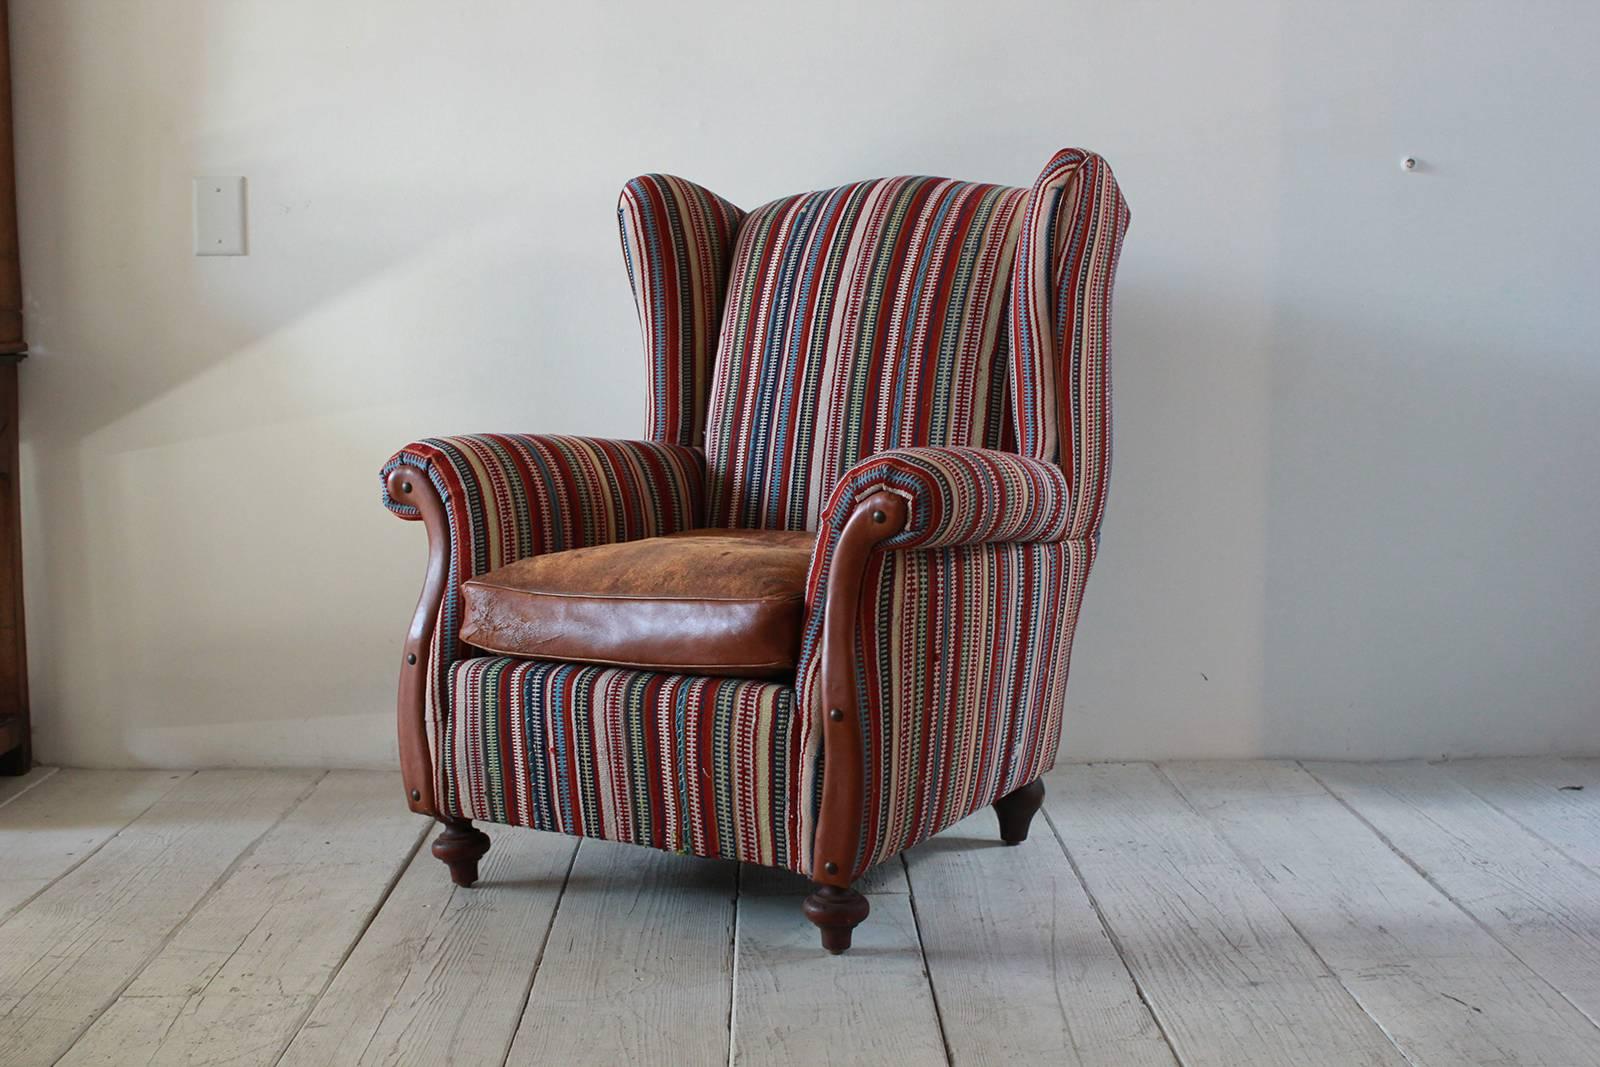 Mid-20th Century Italian Kilim Wing Back Chair with Original Leather Seat